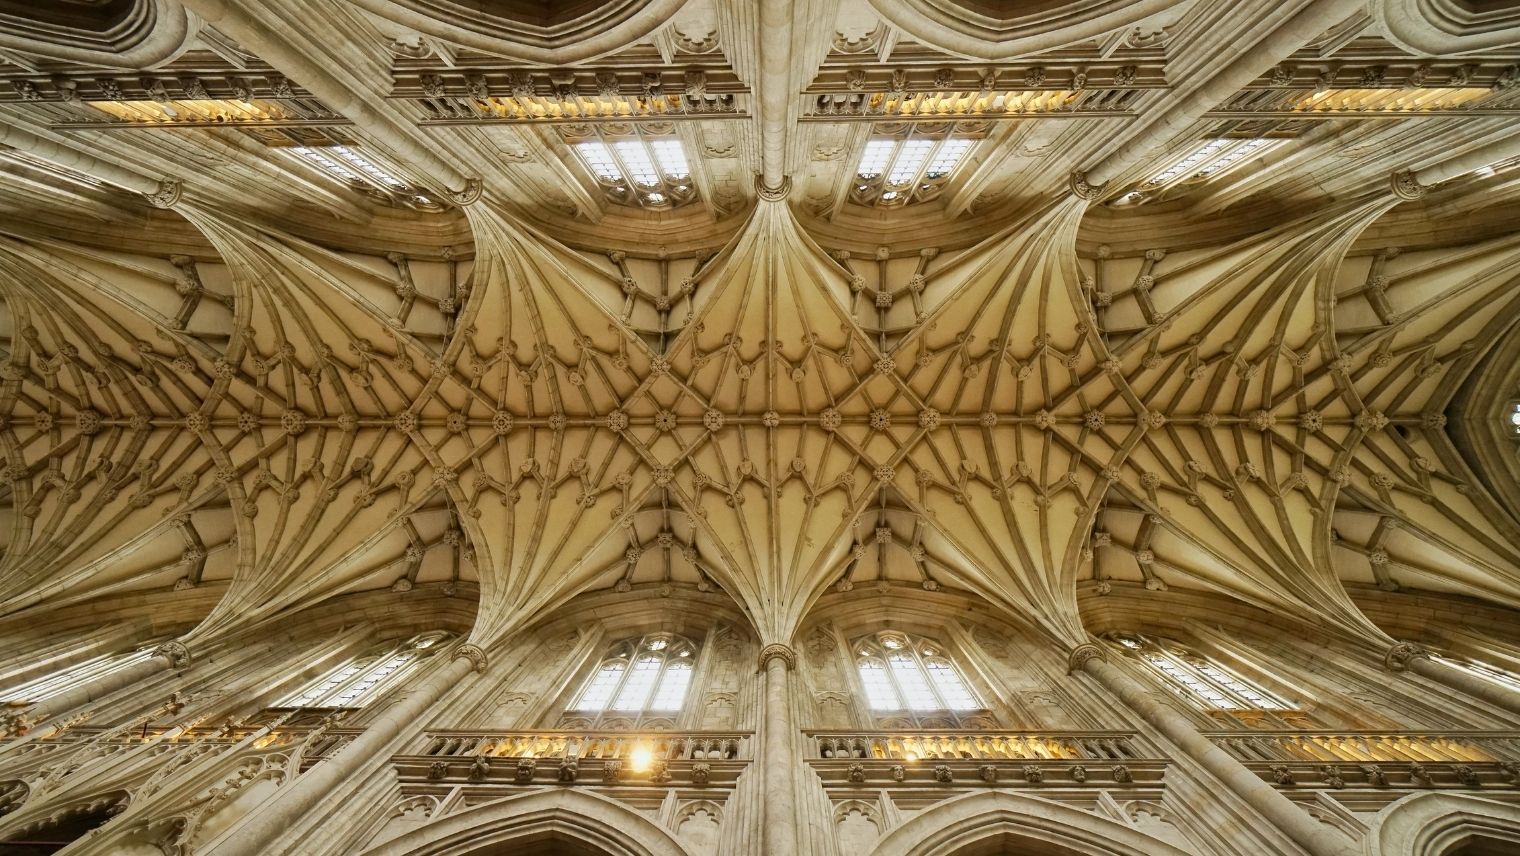 Looking directly up into the ceiling of Winchester cathedral